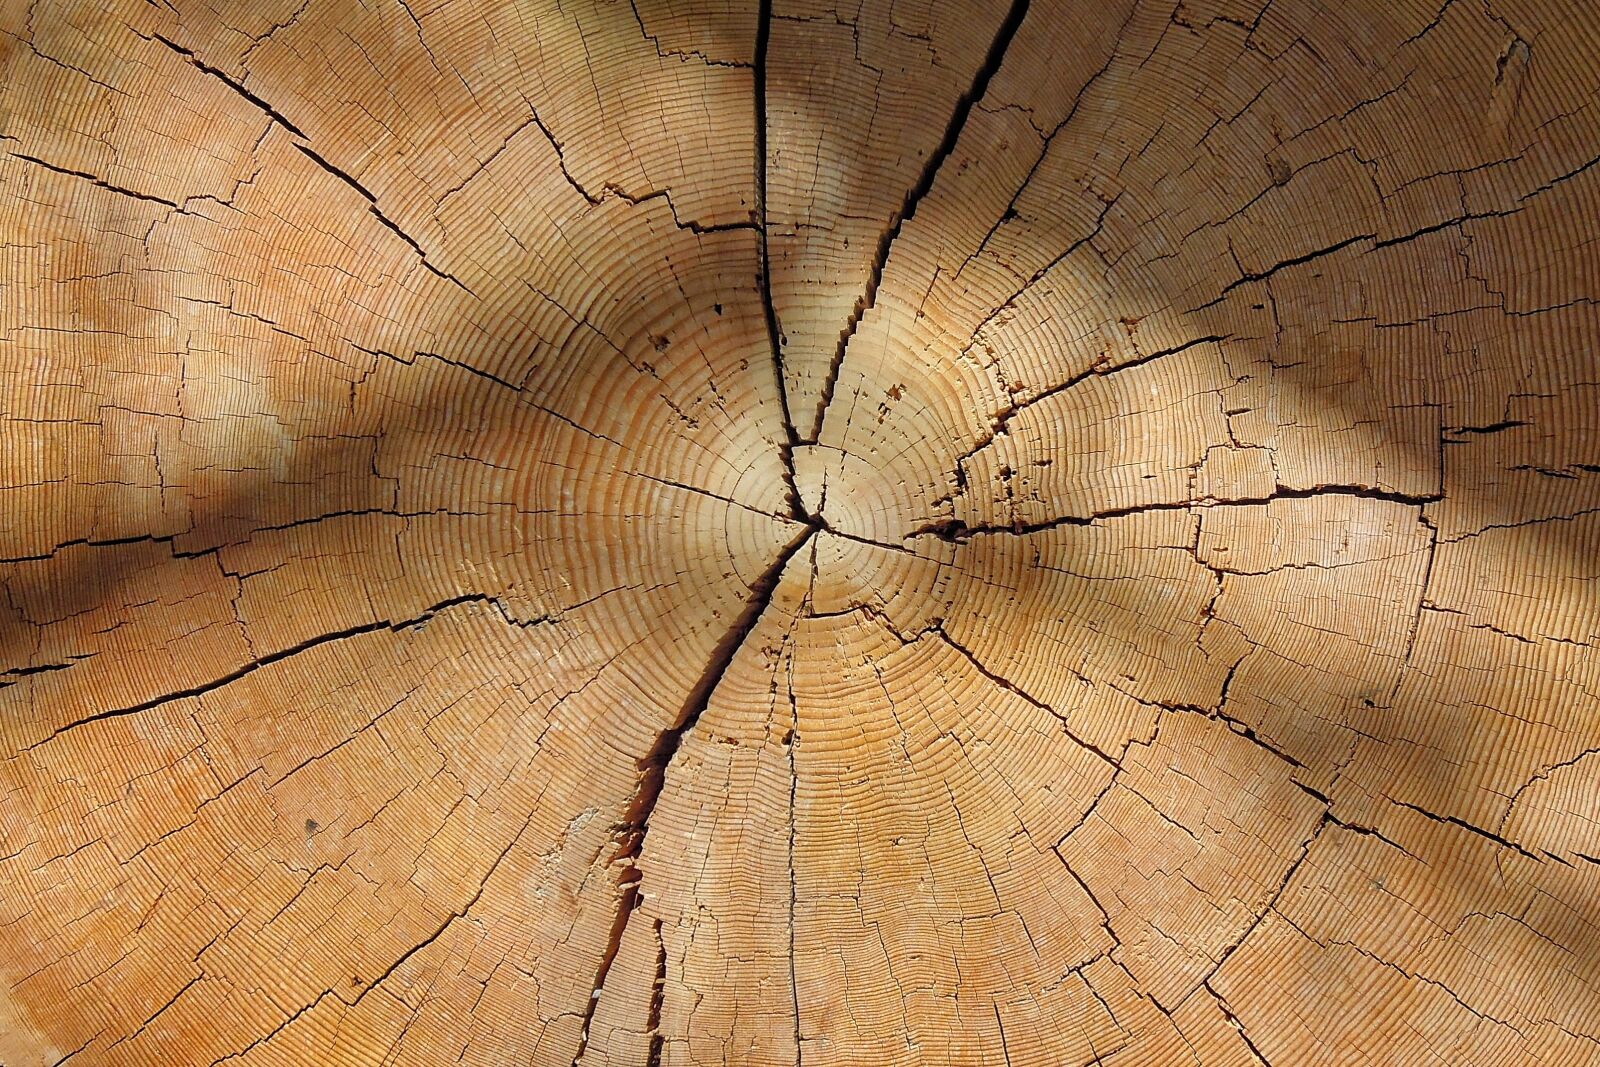 Nikon Coolpix P300 sample photo. Wood, tribe, annual rings photography